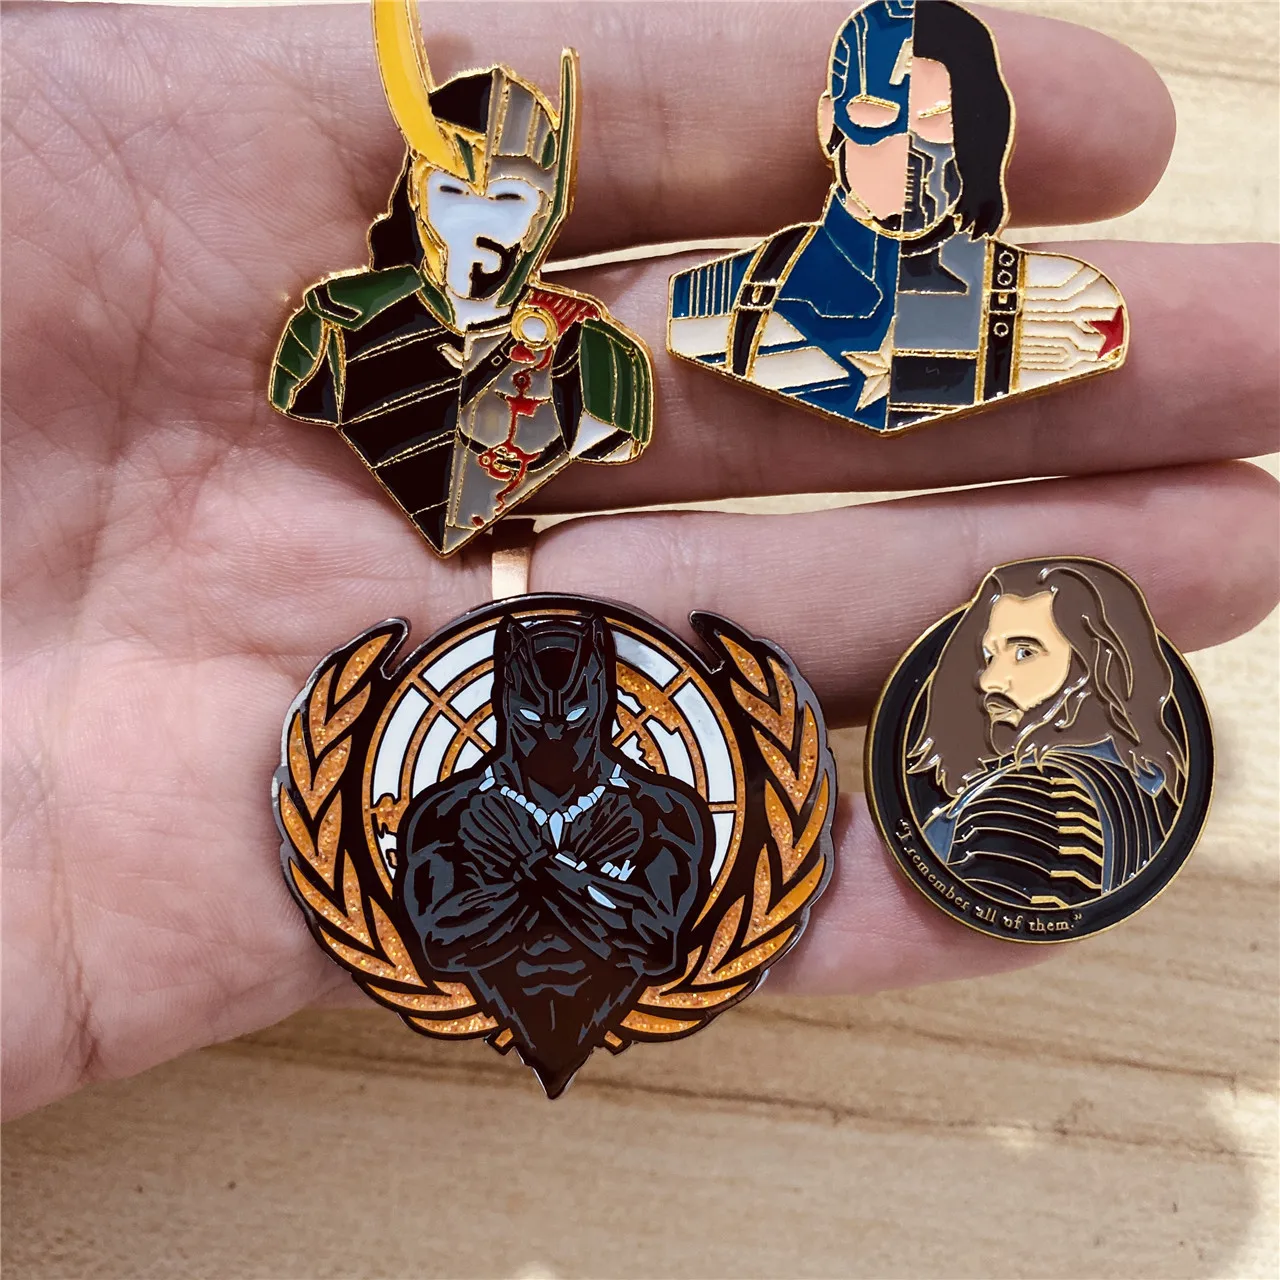 

Disney Brooch Marvel Enamel Pin Avengers Captain America Winter Soldier Thor Black Panther Metal Badge Fashion Costume Jewelry